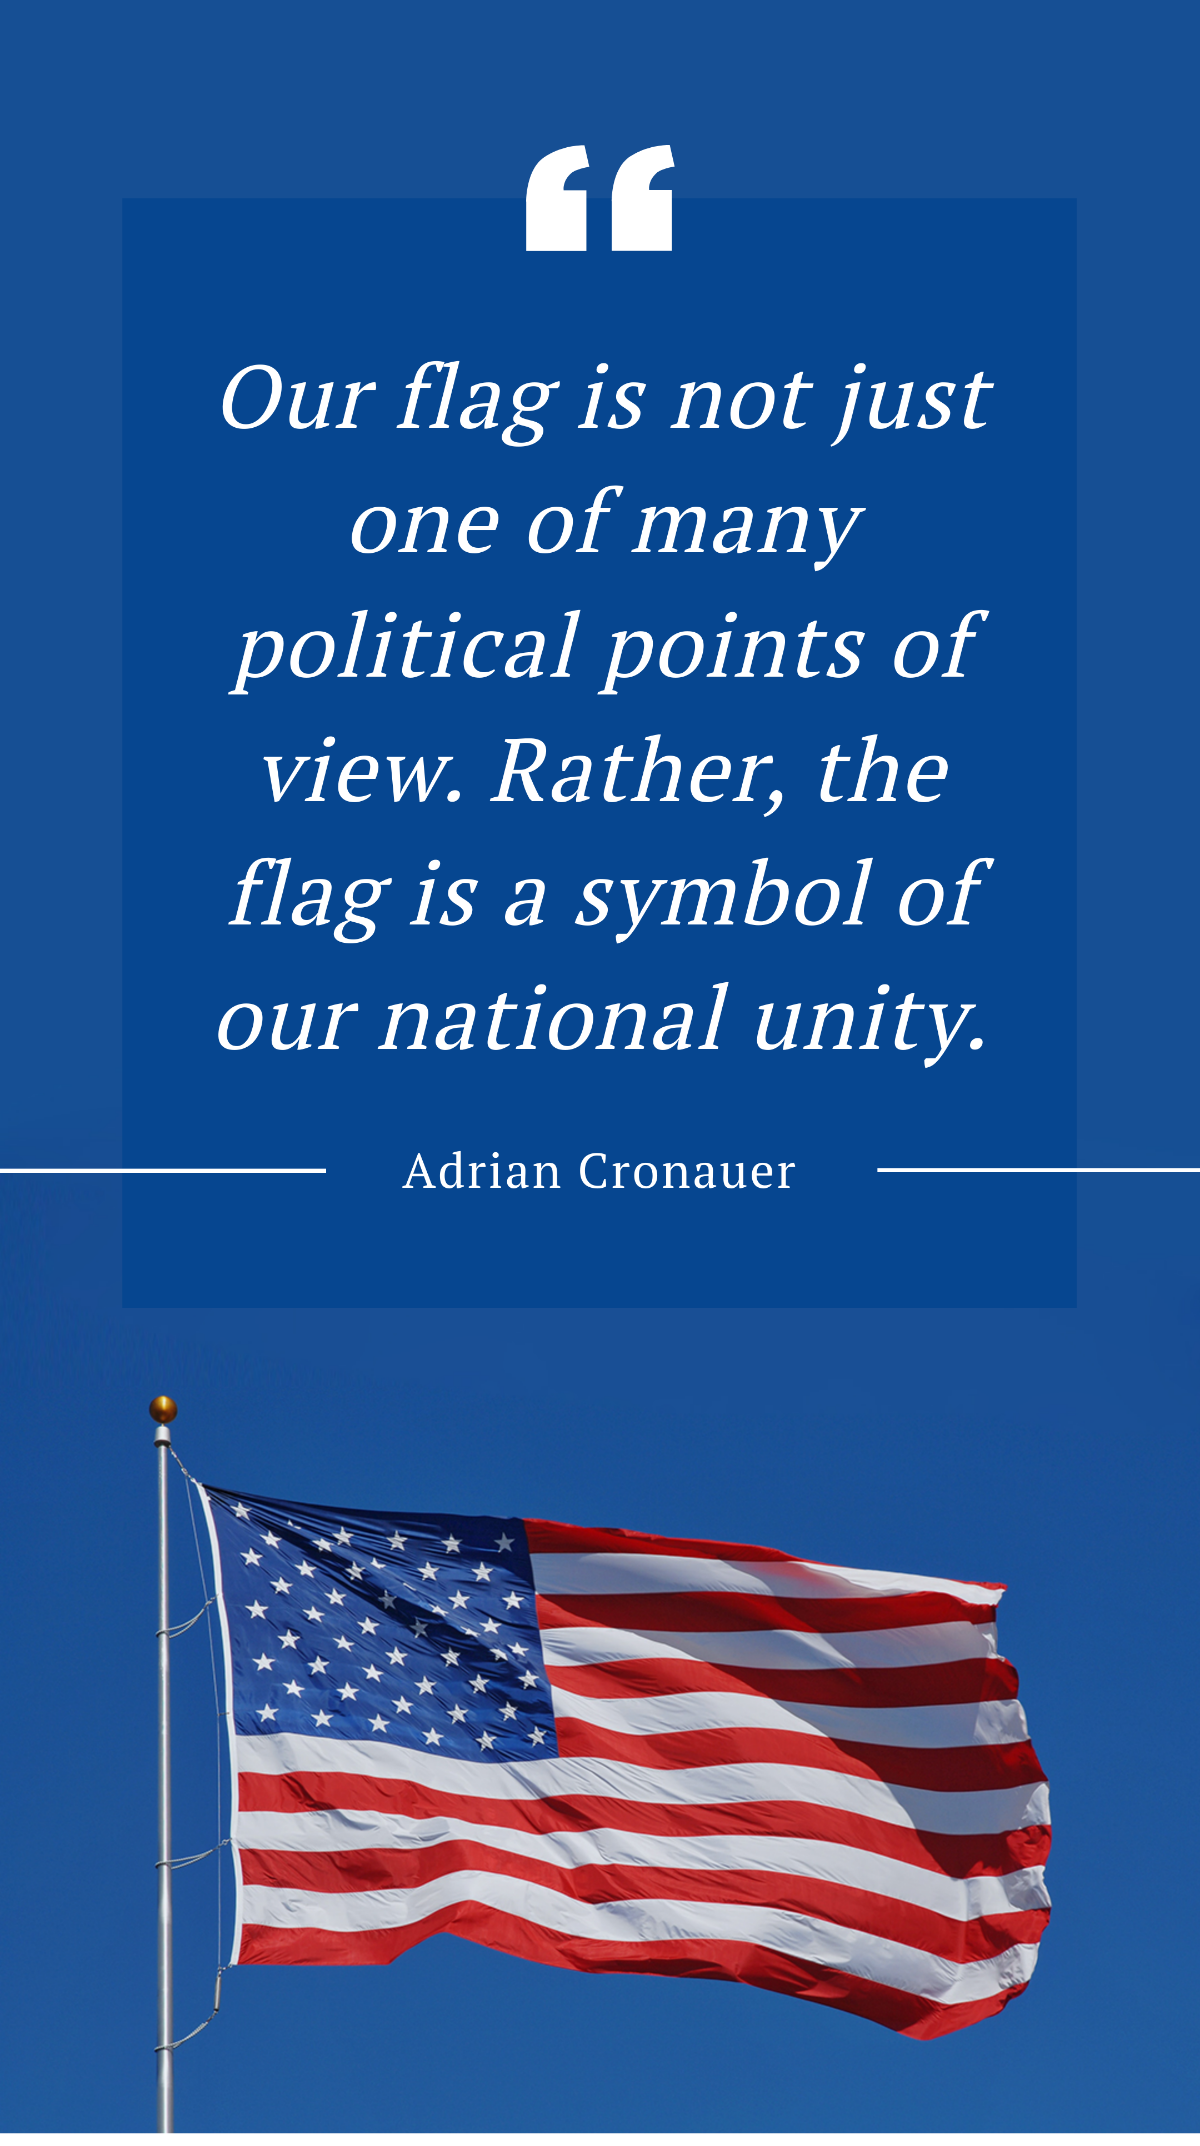 Adrian Cronauer - "Our flag is not just one of many political points of view. Rather, the flag is a symbol of our national unity.”